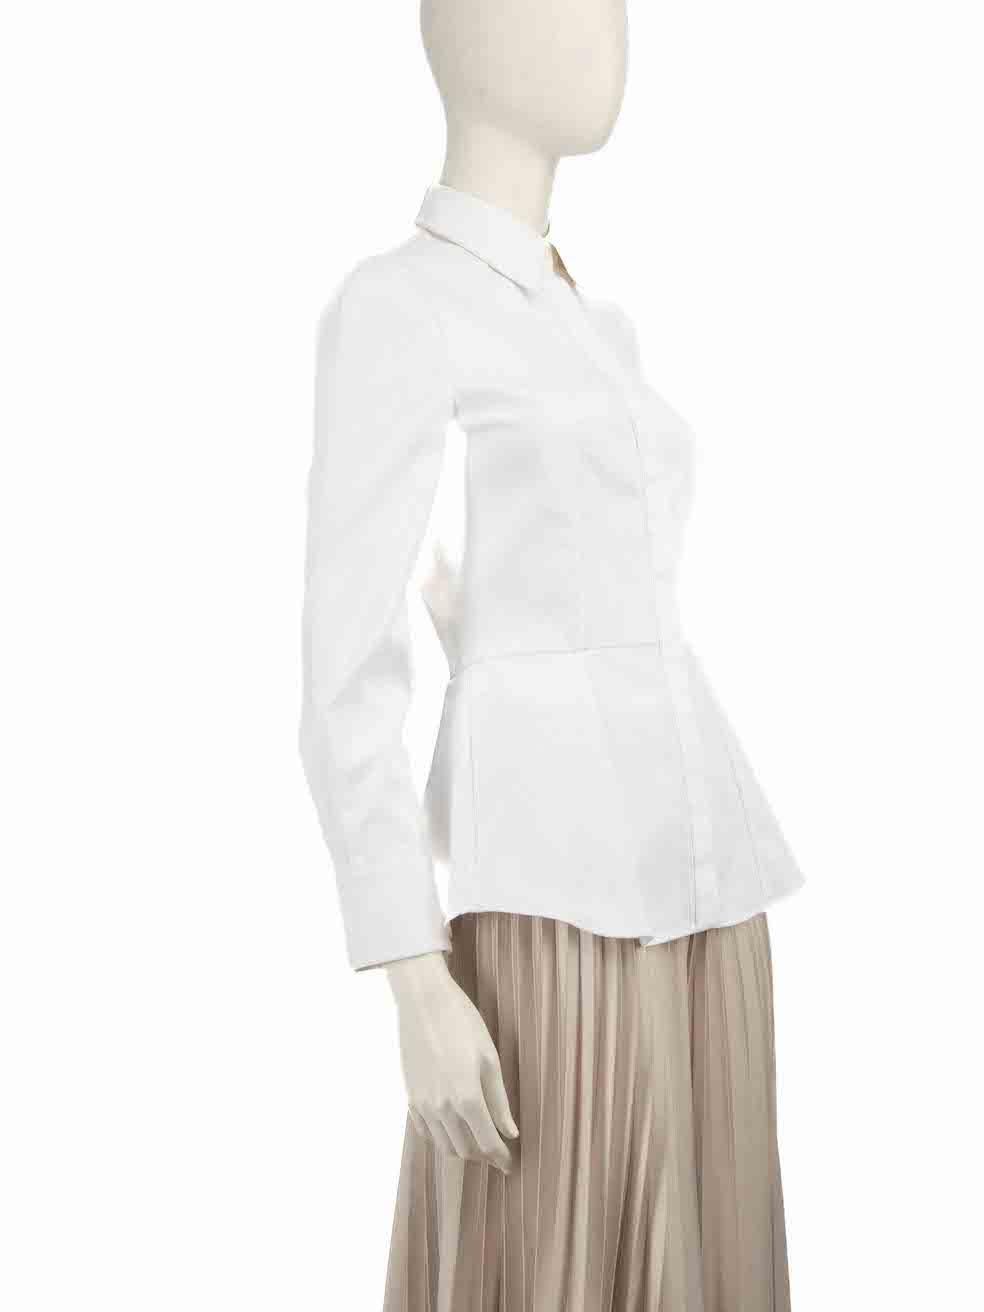 CONDITION is Very good. Minimal wear to shirt is evident. Minimal wear to the front button fastening lining with discoloured marks on this used Alexander McQueen designer resale item.
 
 
 
 Details
 
 
 White
 
 Cotton
 
 Shirt
 
 Button up